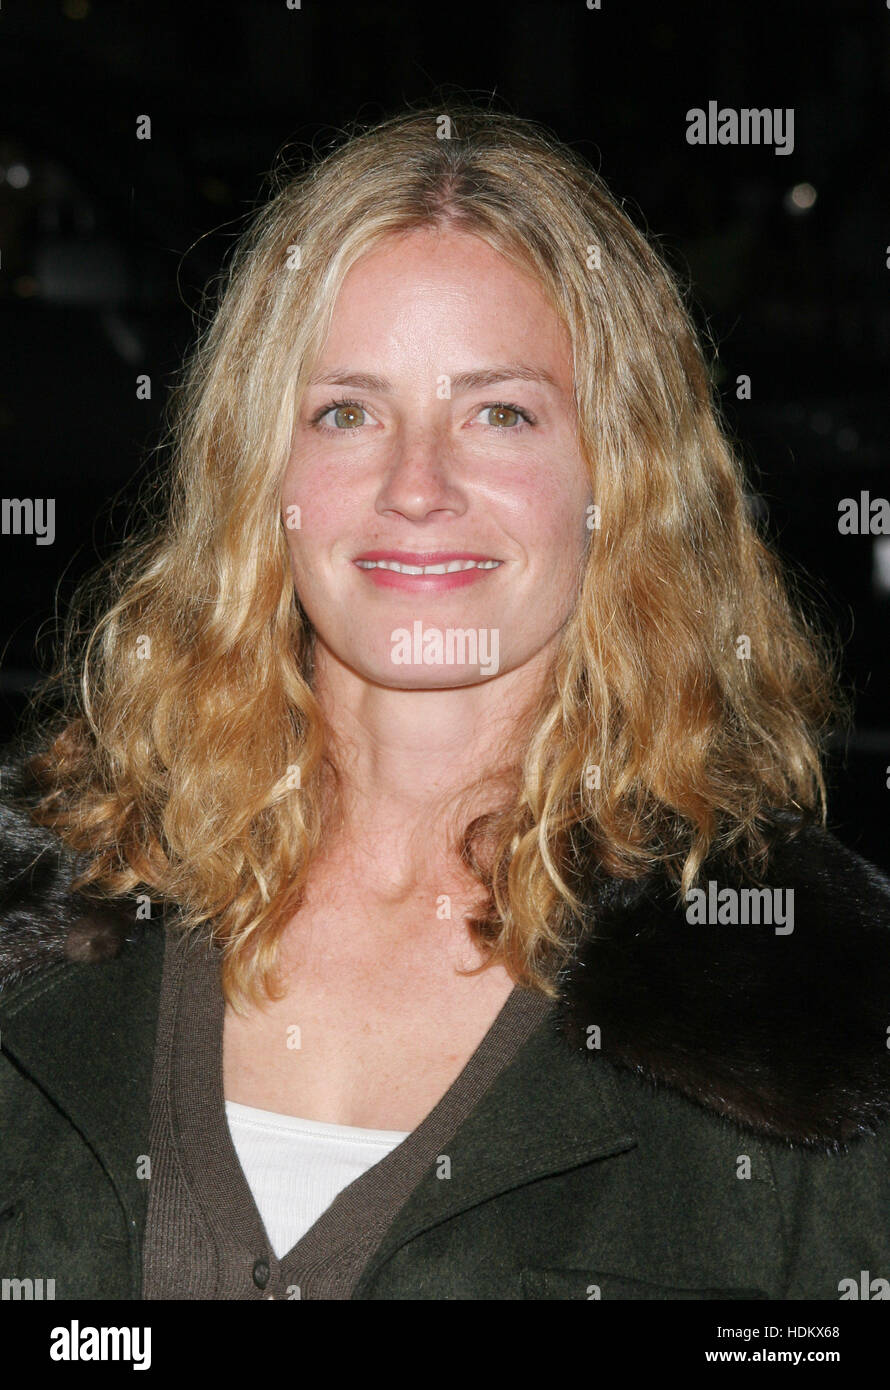 Actress Elisabeth Shue poses for photographers at the premire of the film, 'Friday Night Lights', at Grauman's Chinese Theater in Los Angeles, October 6,  2004. The Universal film about the 1988 season of the Permian High Panthers football team of Odessa, Texas, opens in the US on October 8. Photo by Francis Specker Stock Photo